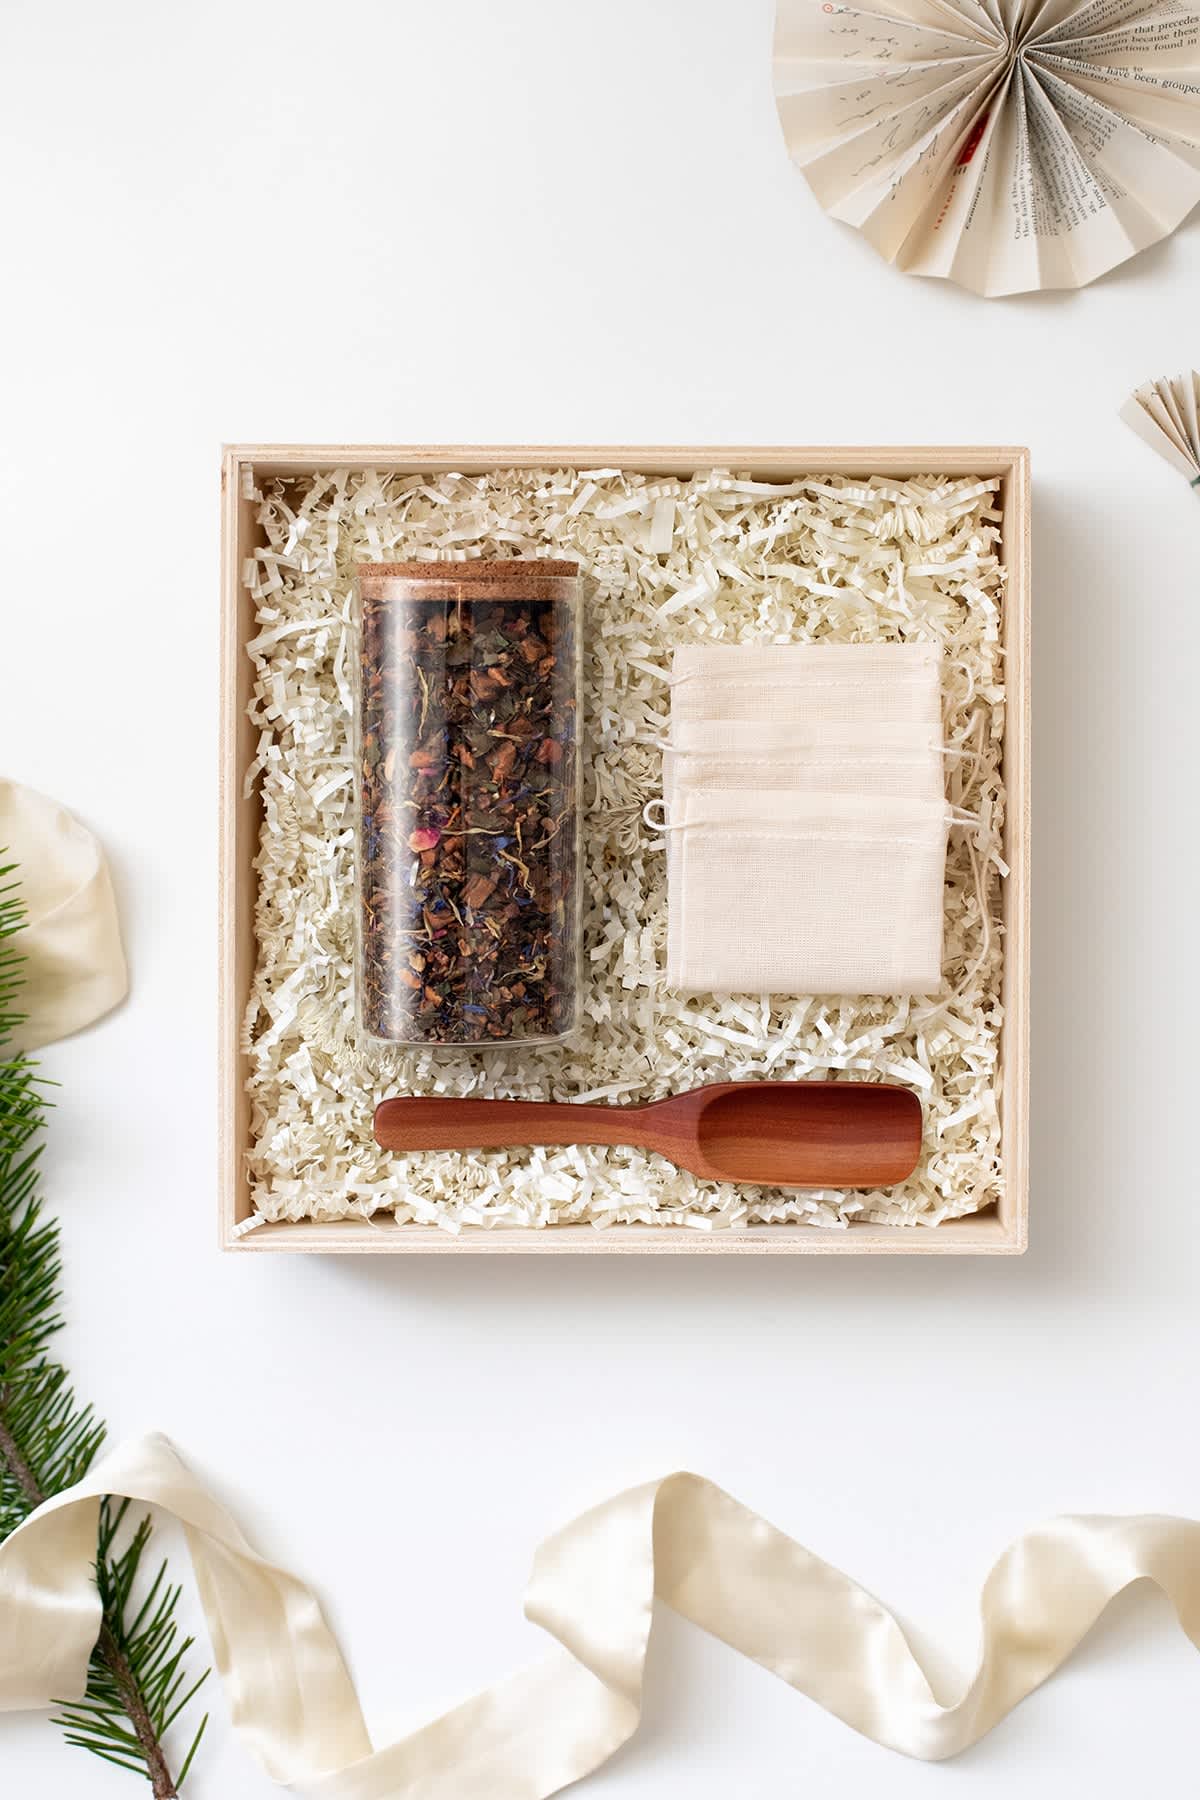 7 Last-Minute Homemade Gifts That Will Help Make Life Better